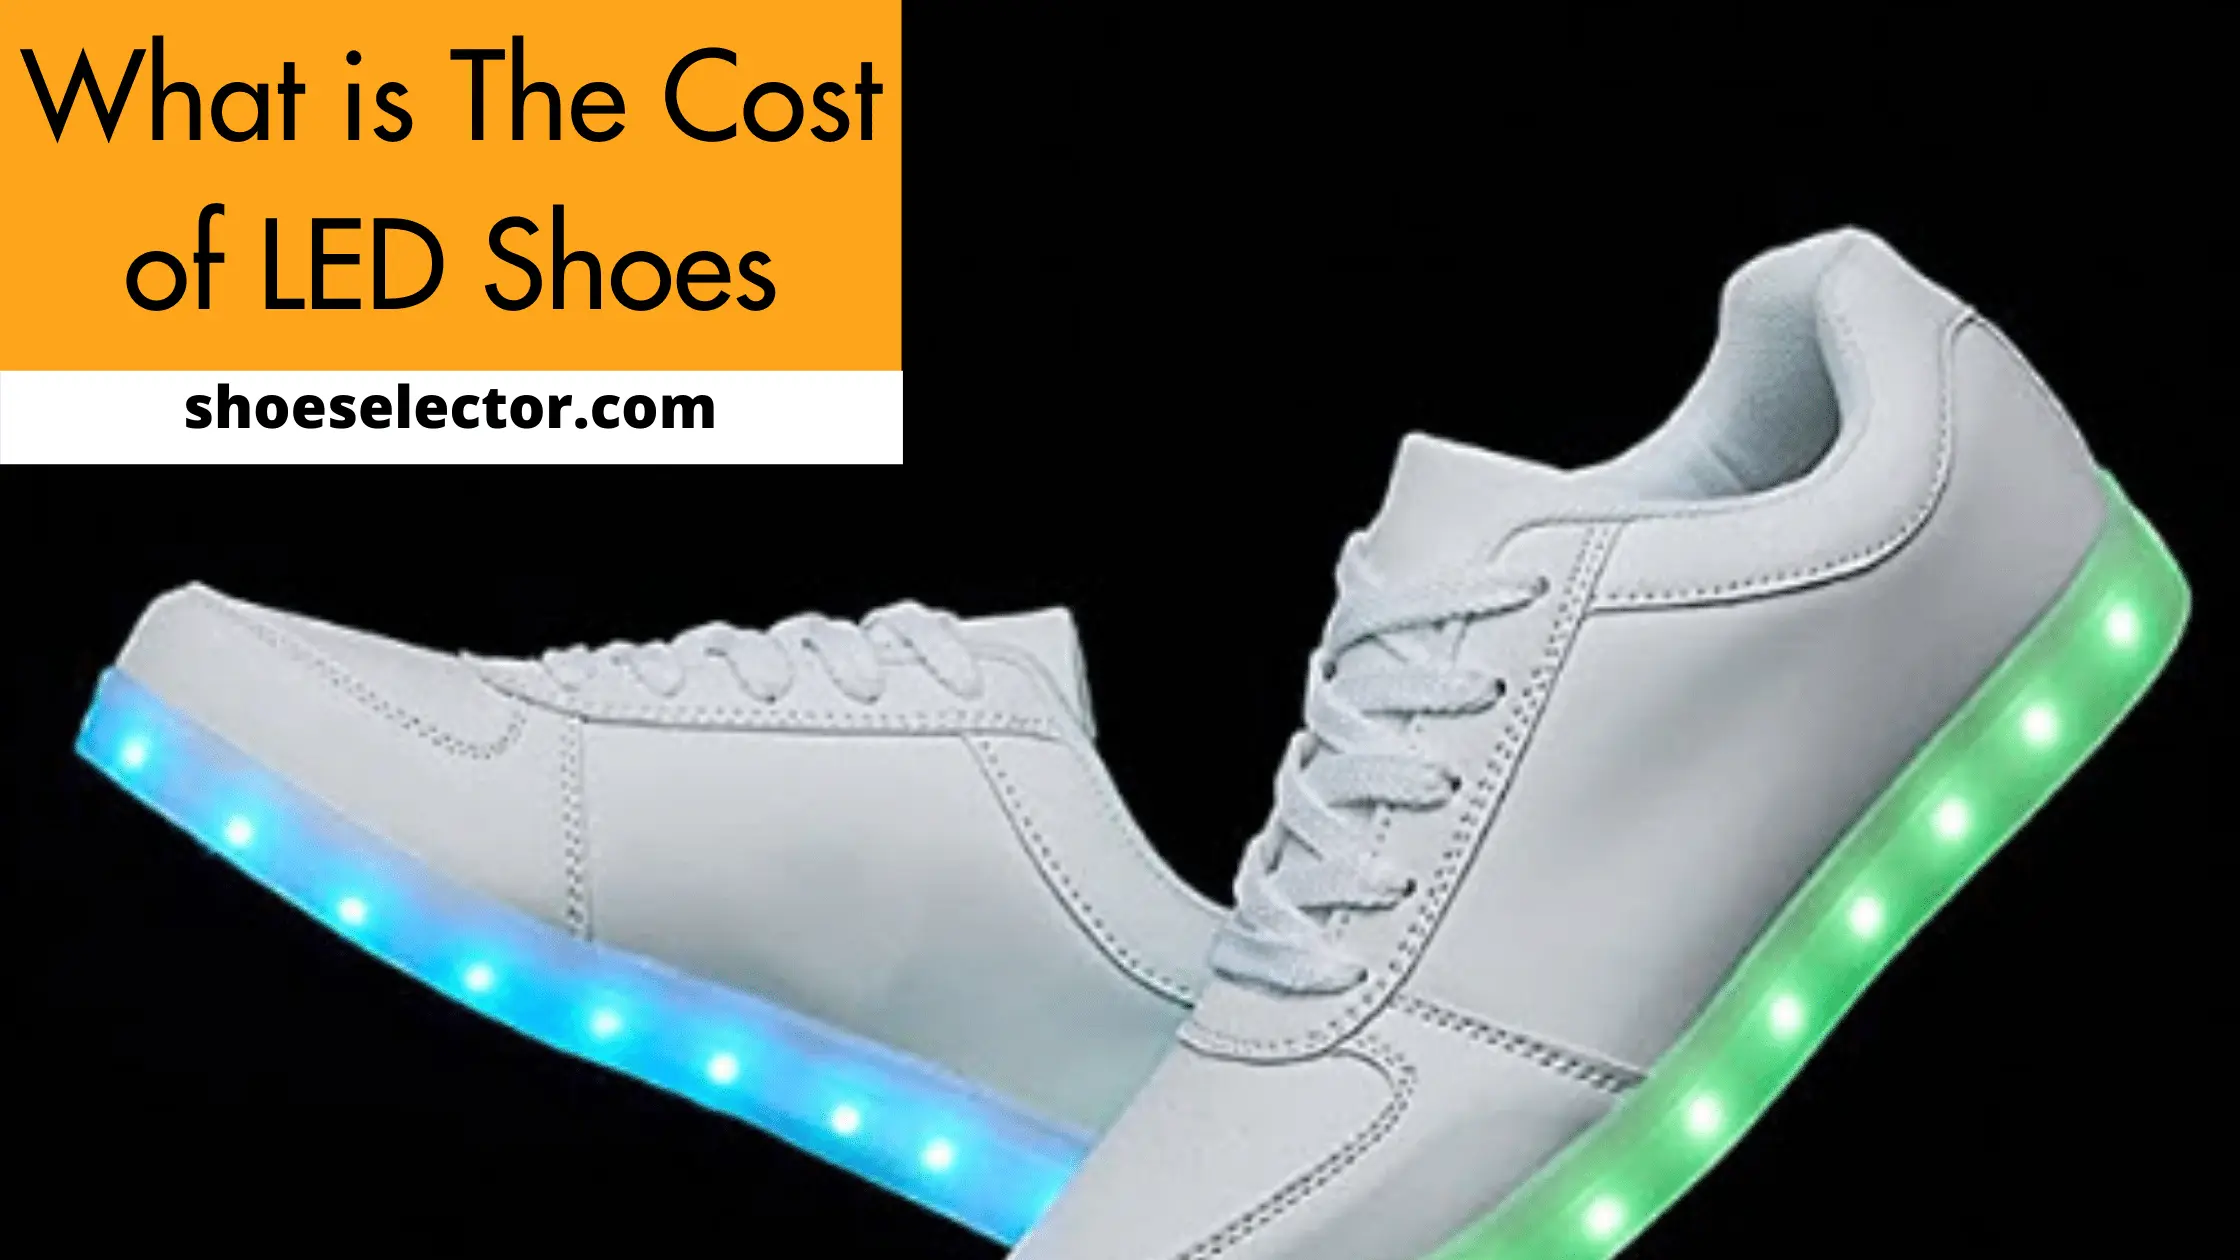 What is The Cost of LED Shoes?